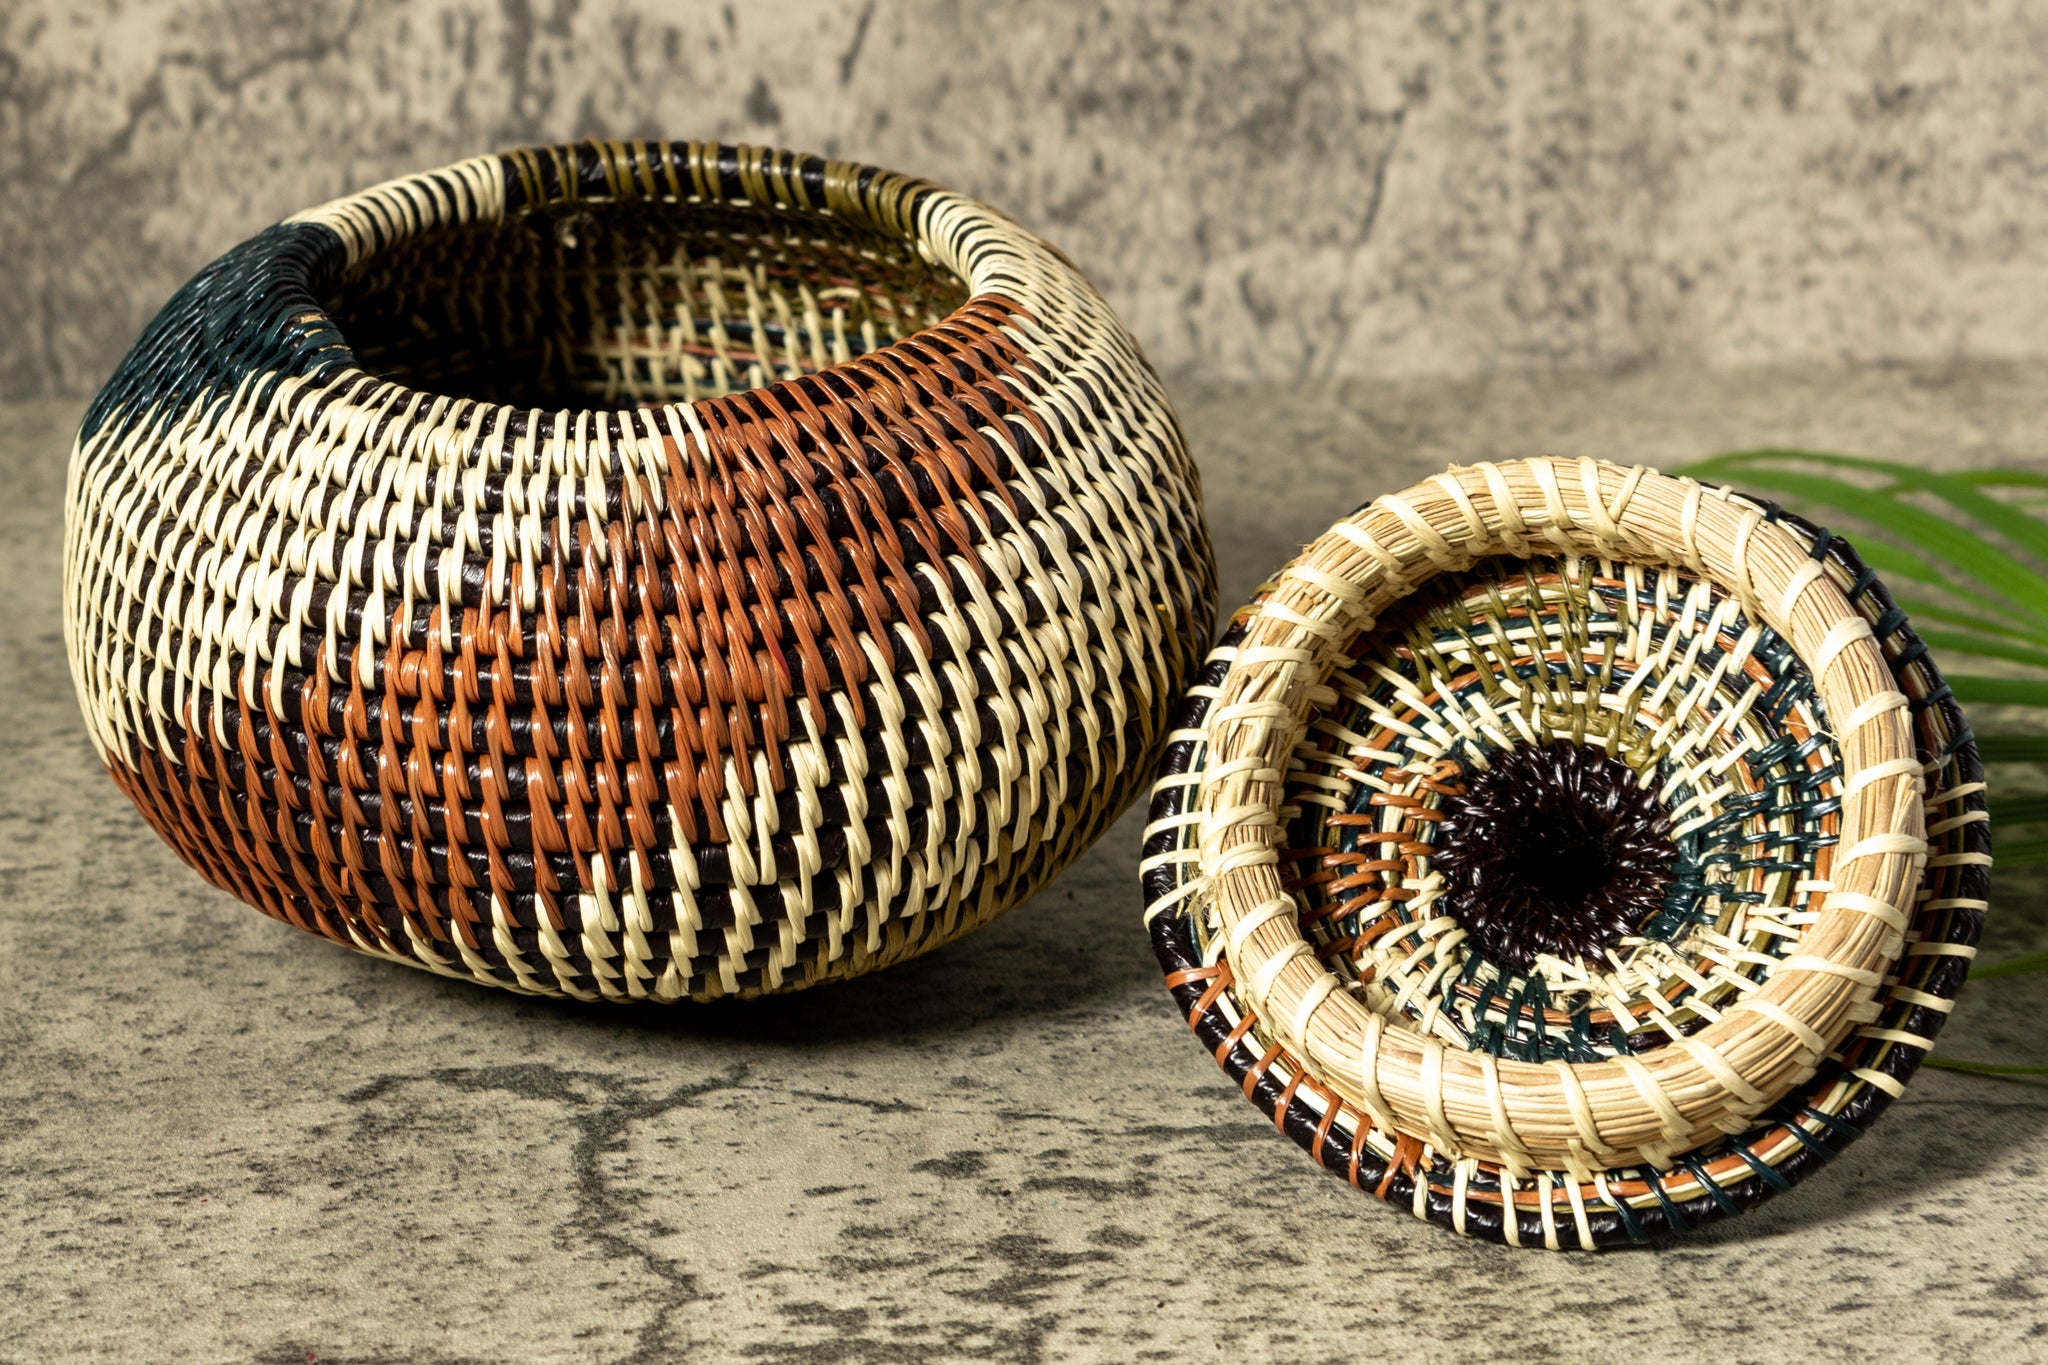 Green White And Brown Swirl Woven Basket With Top